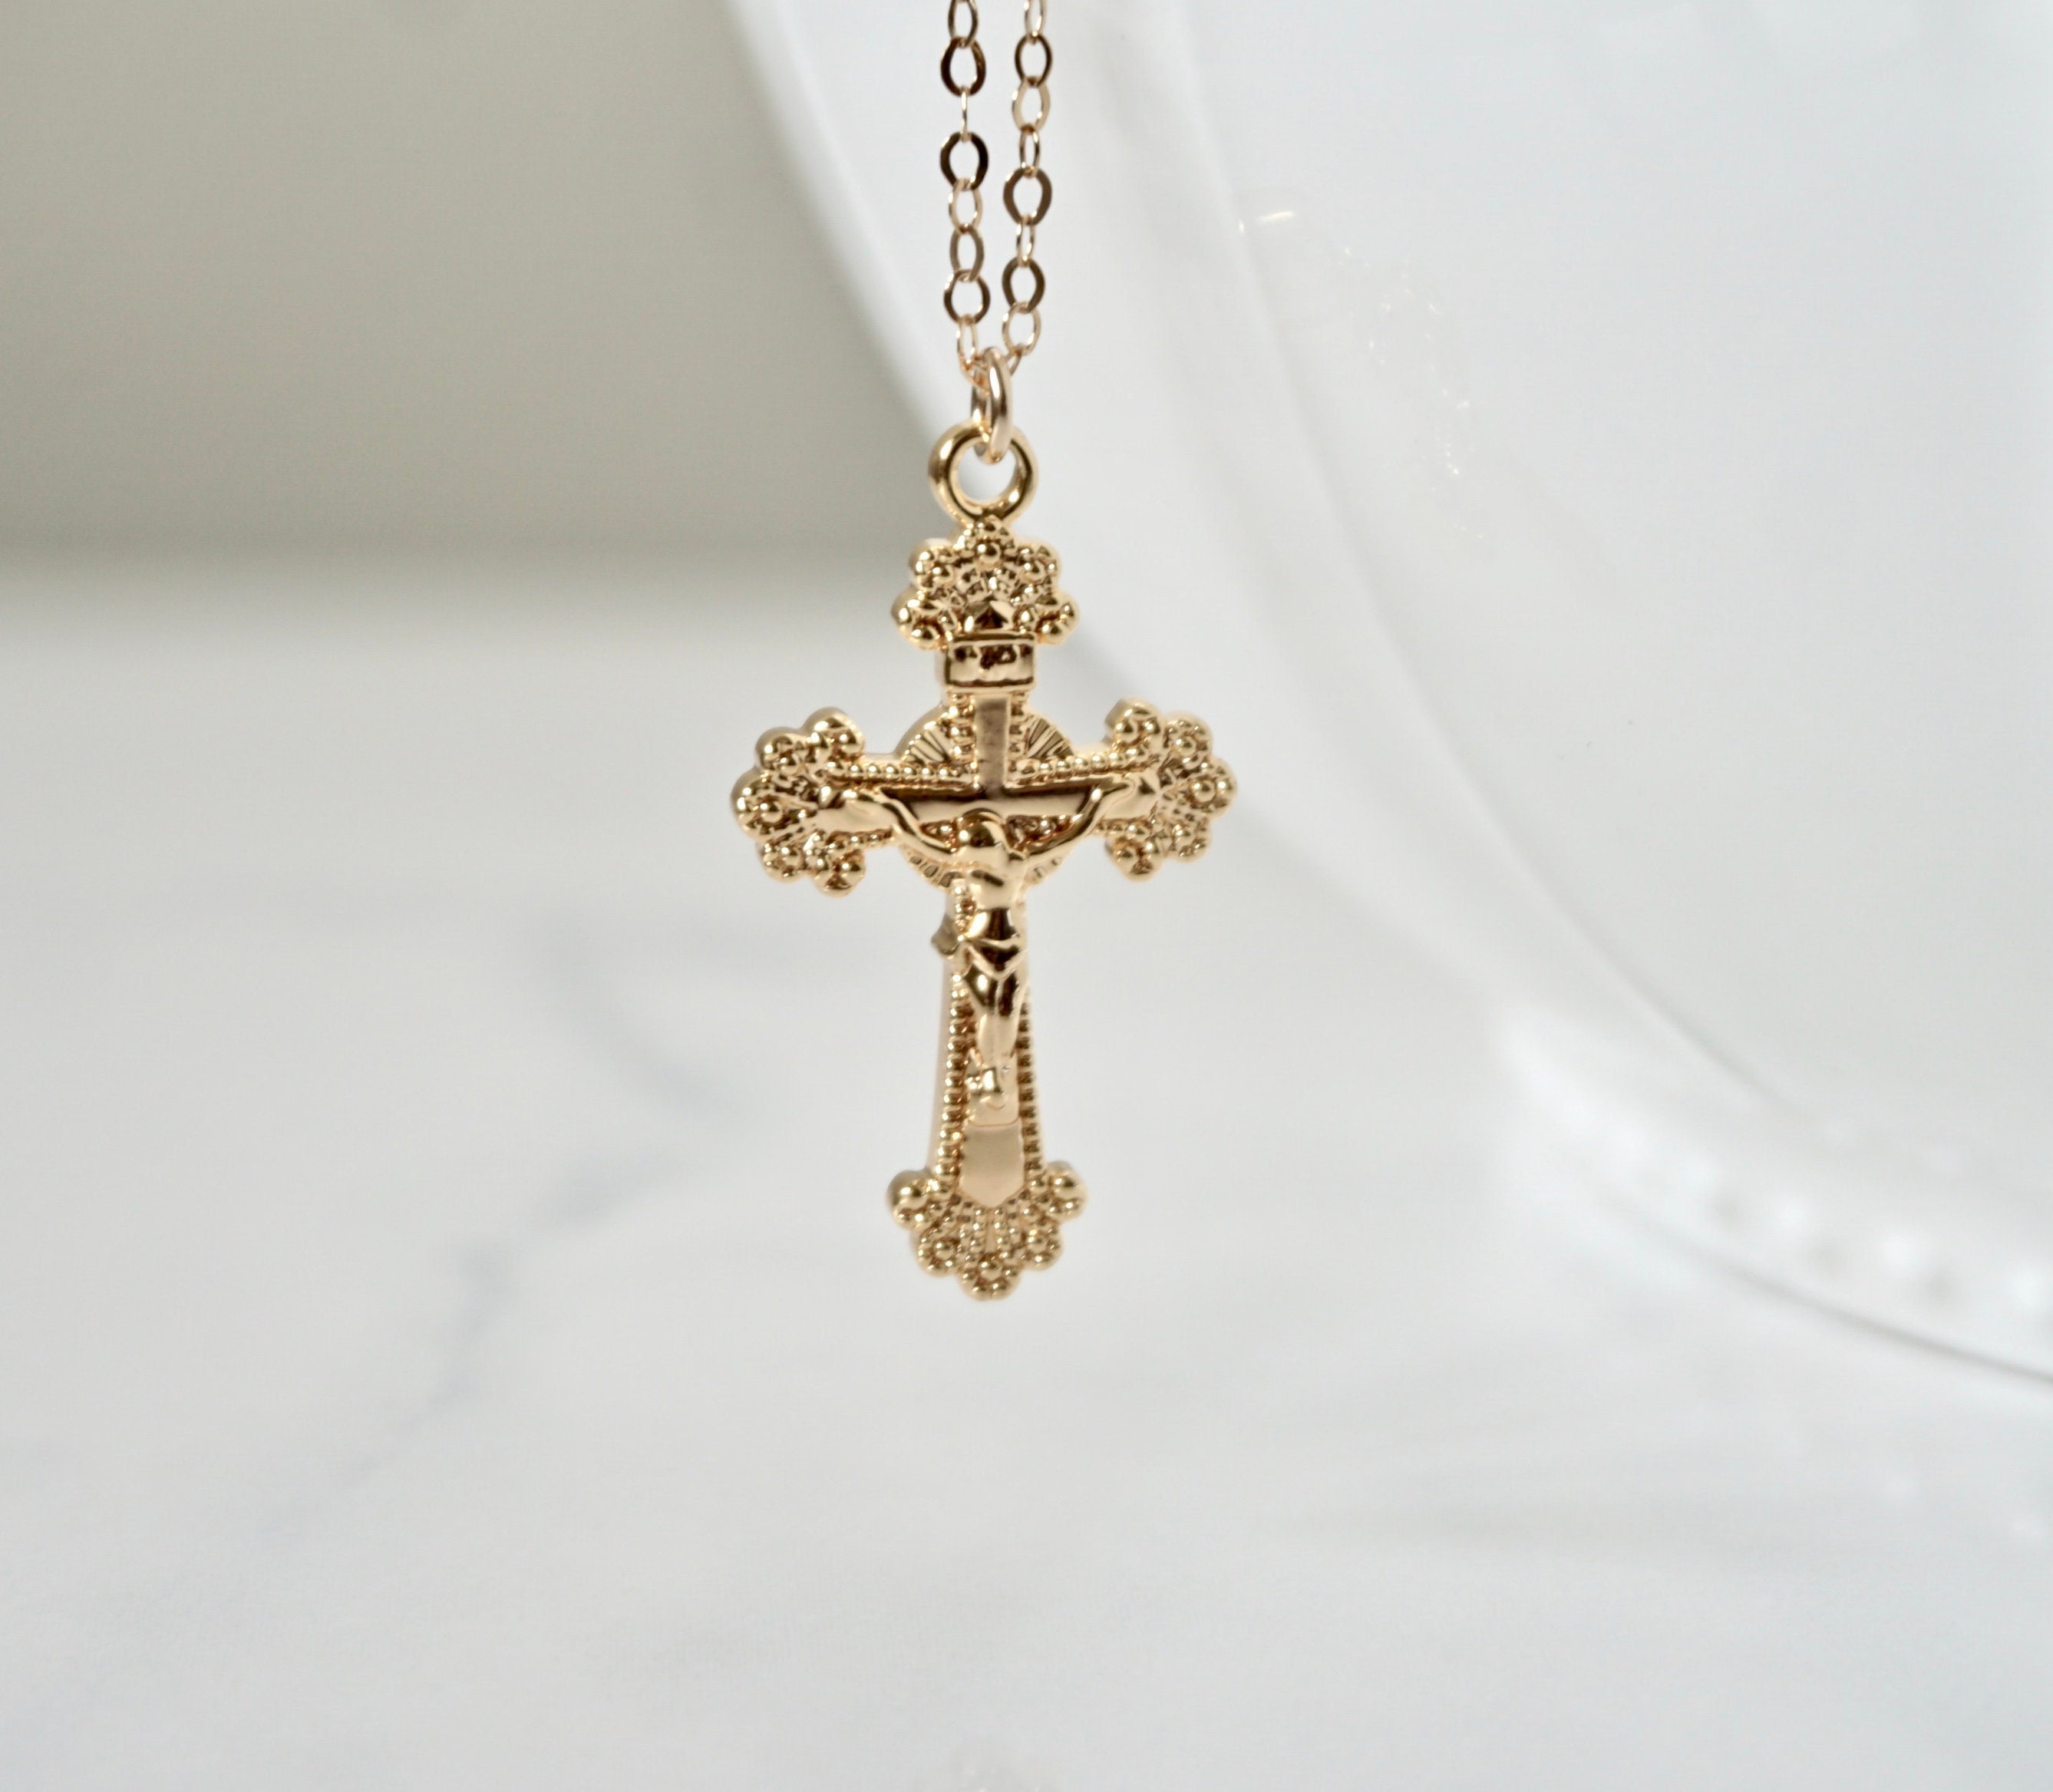 Free Photos - An Elegant, Large Cross Necklace With Intricate Detailing,  Giving It A Regal And Majestic Appearance. The Cross Is The Focal Point Of  The Image, Prominently Displayed In The Center. |